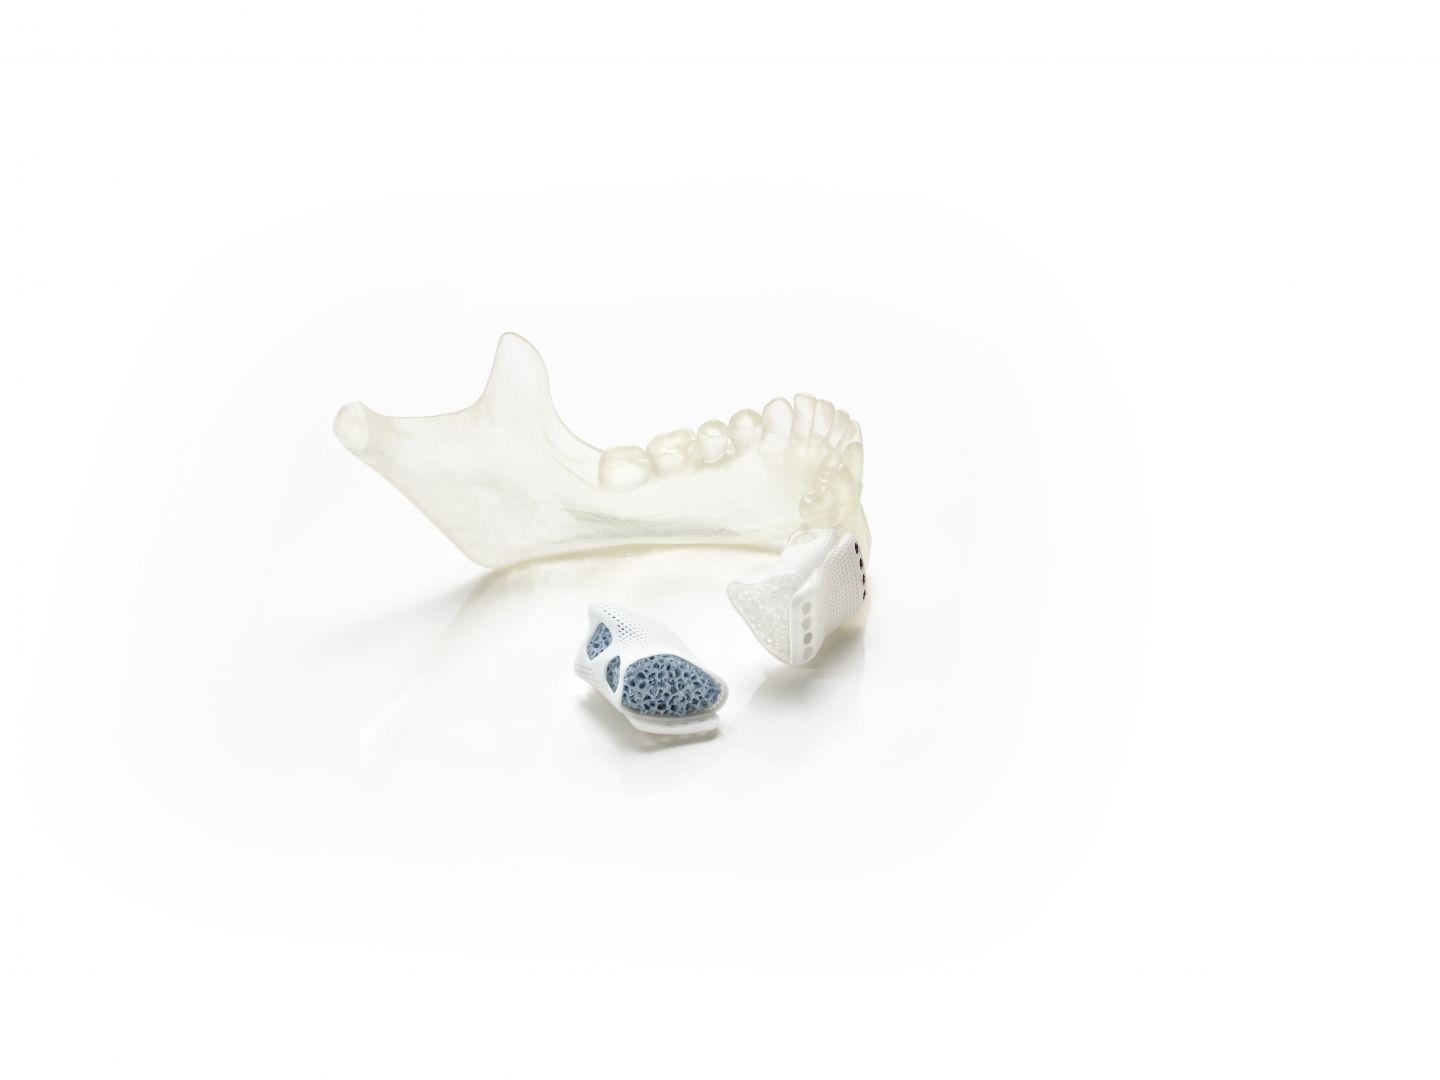 Did you know that complete bone healing is possible thanks to ceramic 3D printing?